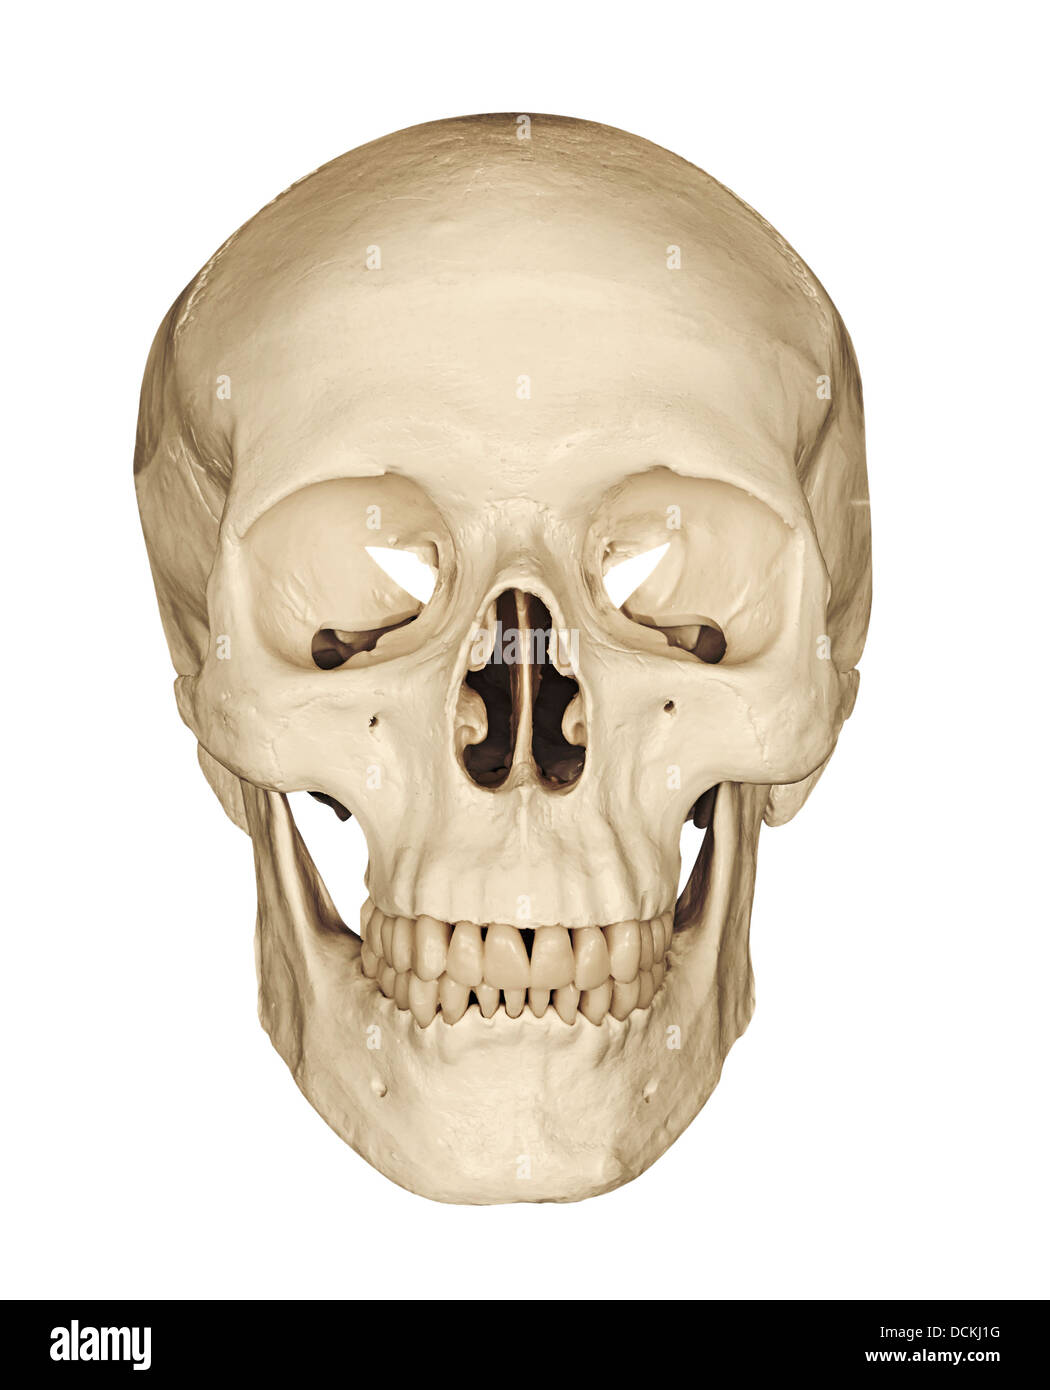 human skull skeletal head isolated against a white background Stock Photo